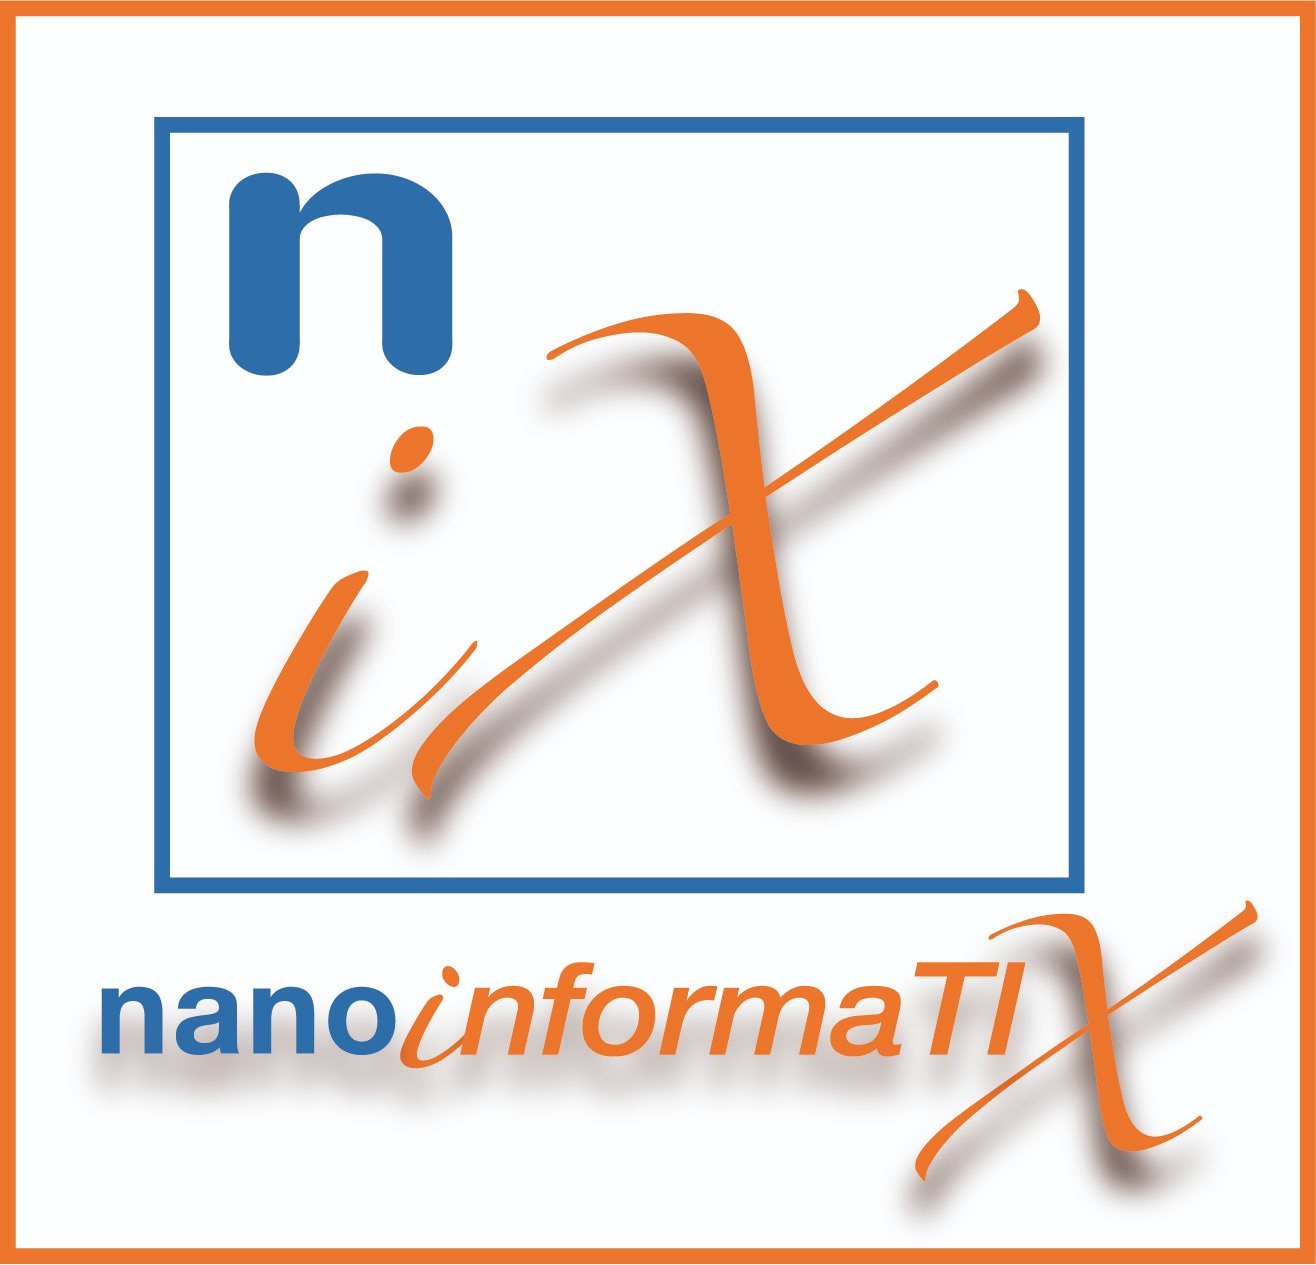 Development and Implementation of a Sustainable Modelling Platform for NanoInformatics #H2020 #nanoinformatics